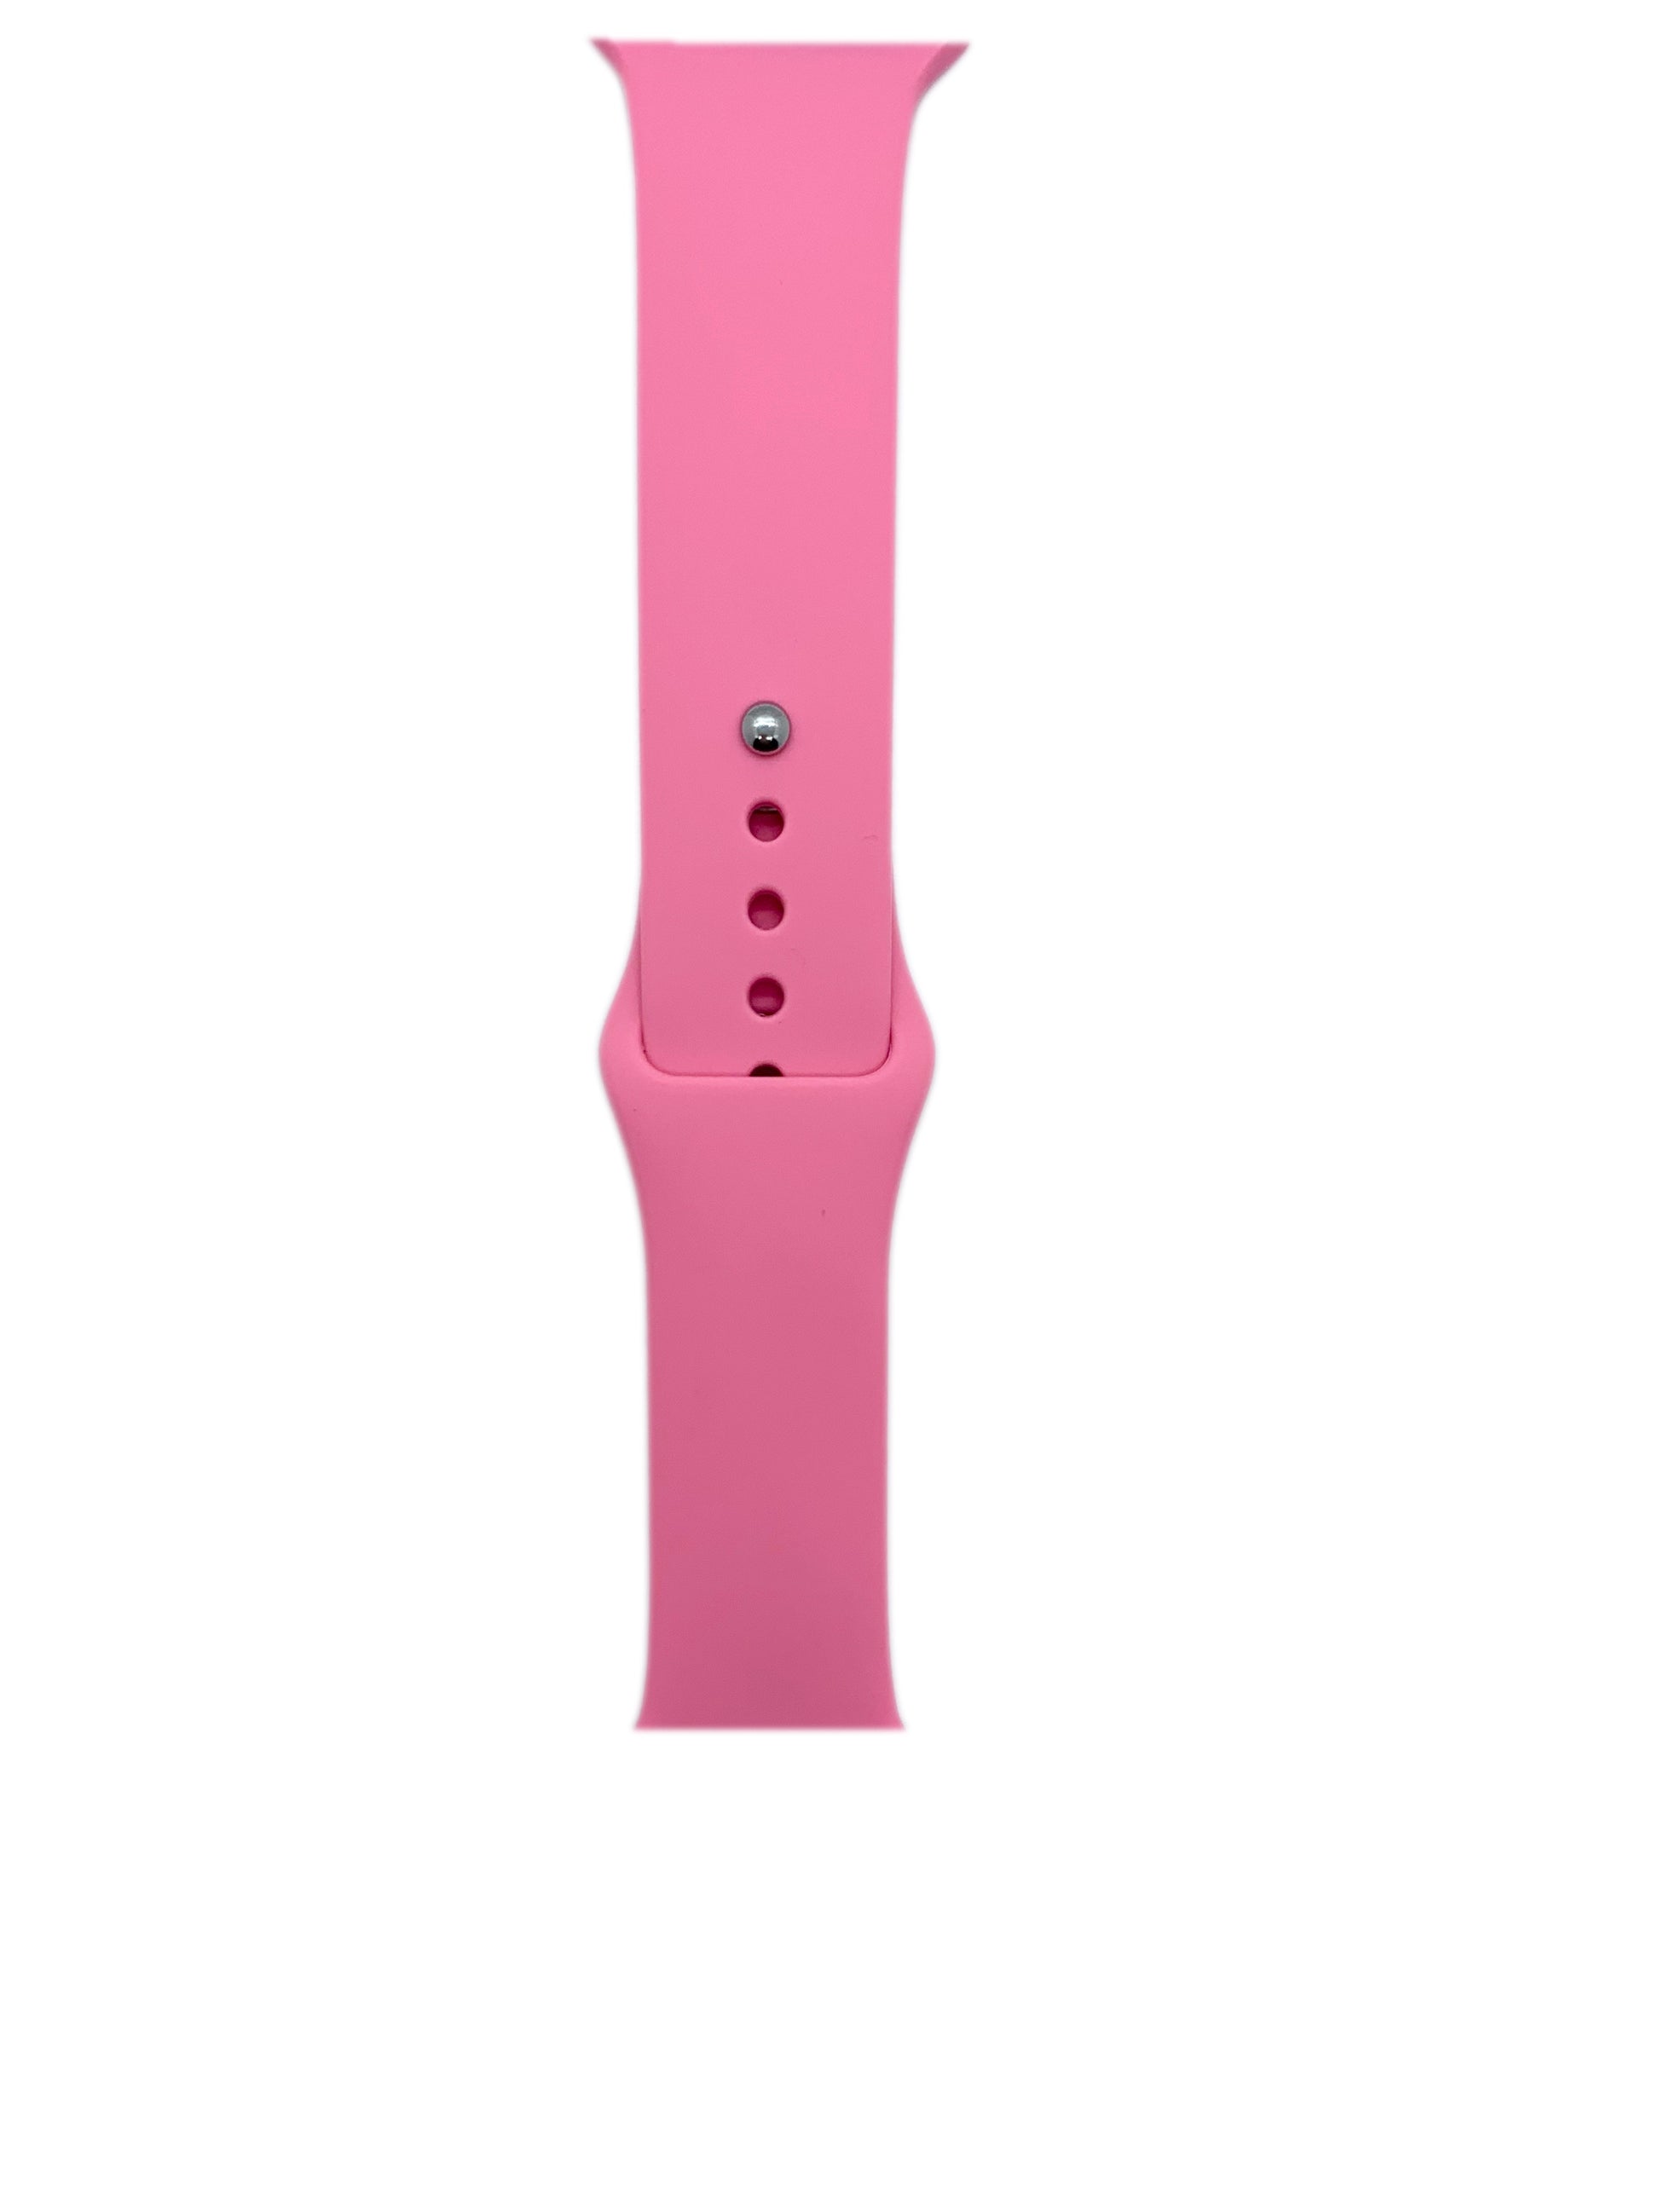 Silicone bands for Apple iWatches - FONIX24SHOP